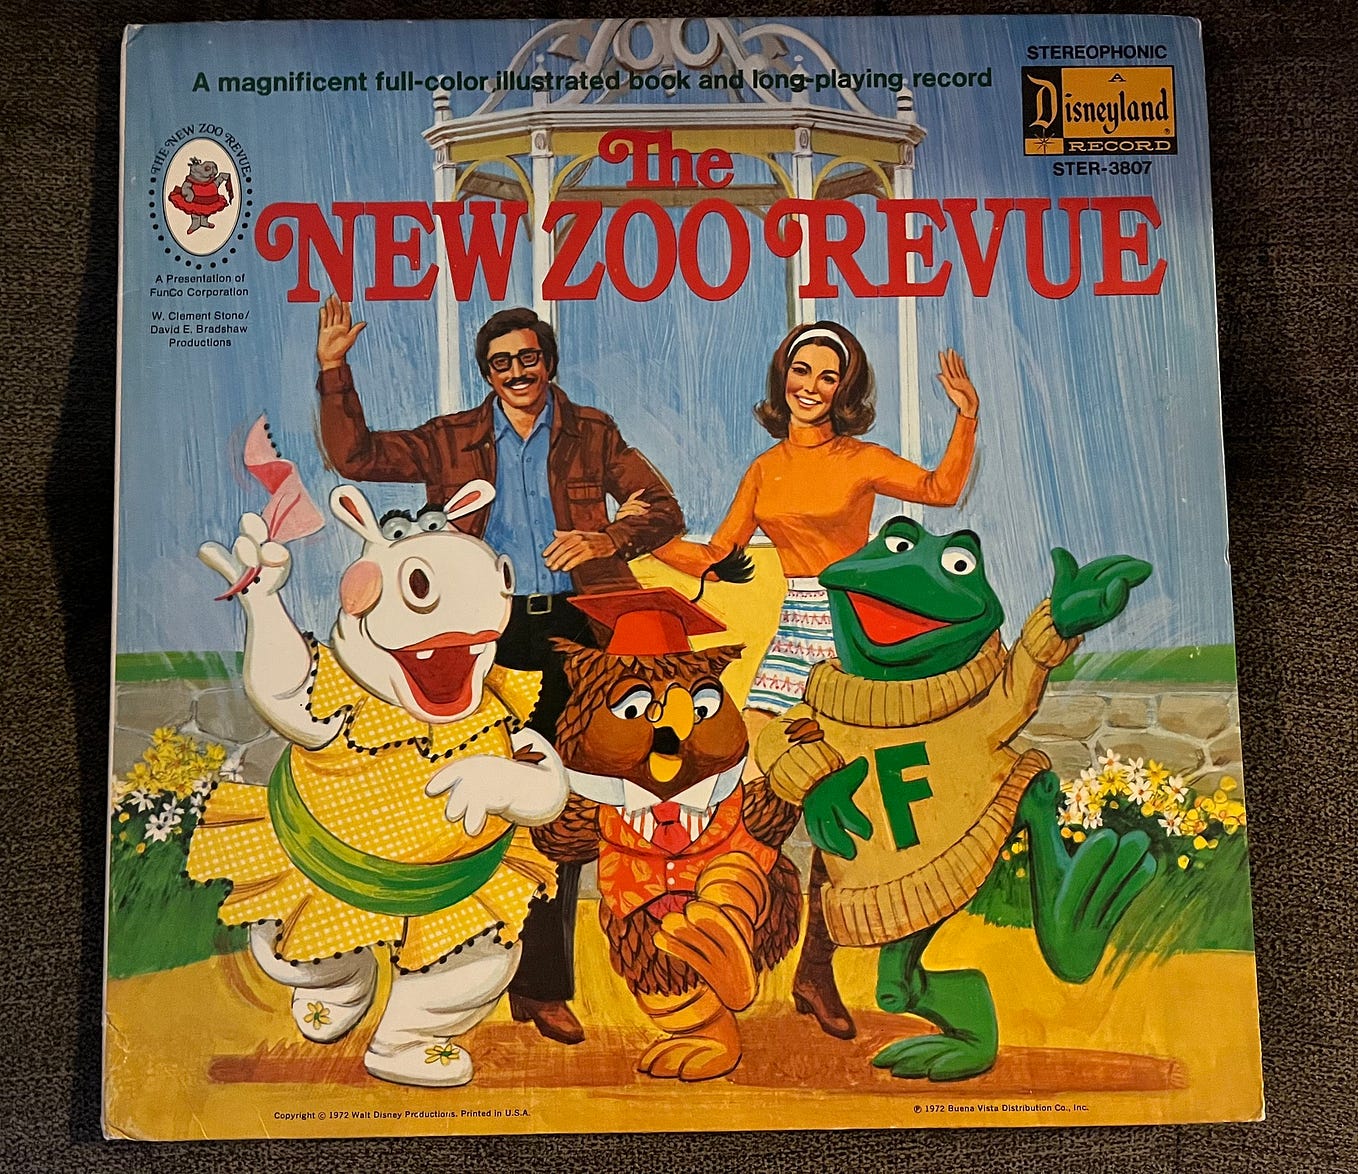 The New Zoo Revue: Doug and Emily Momary on their 1970s Children’s Favorite Series